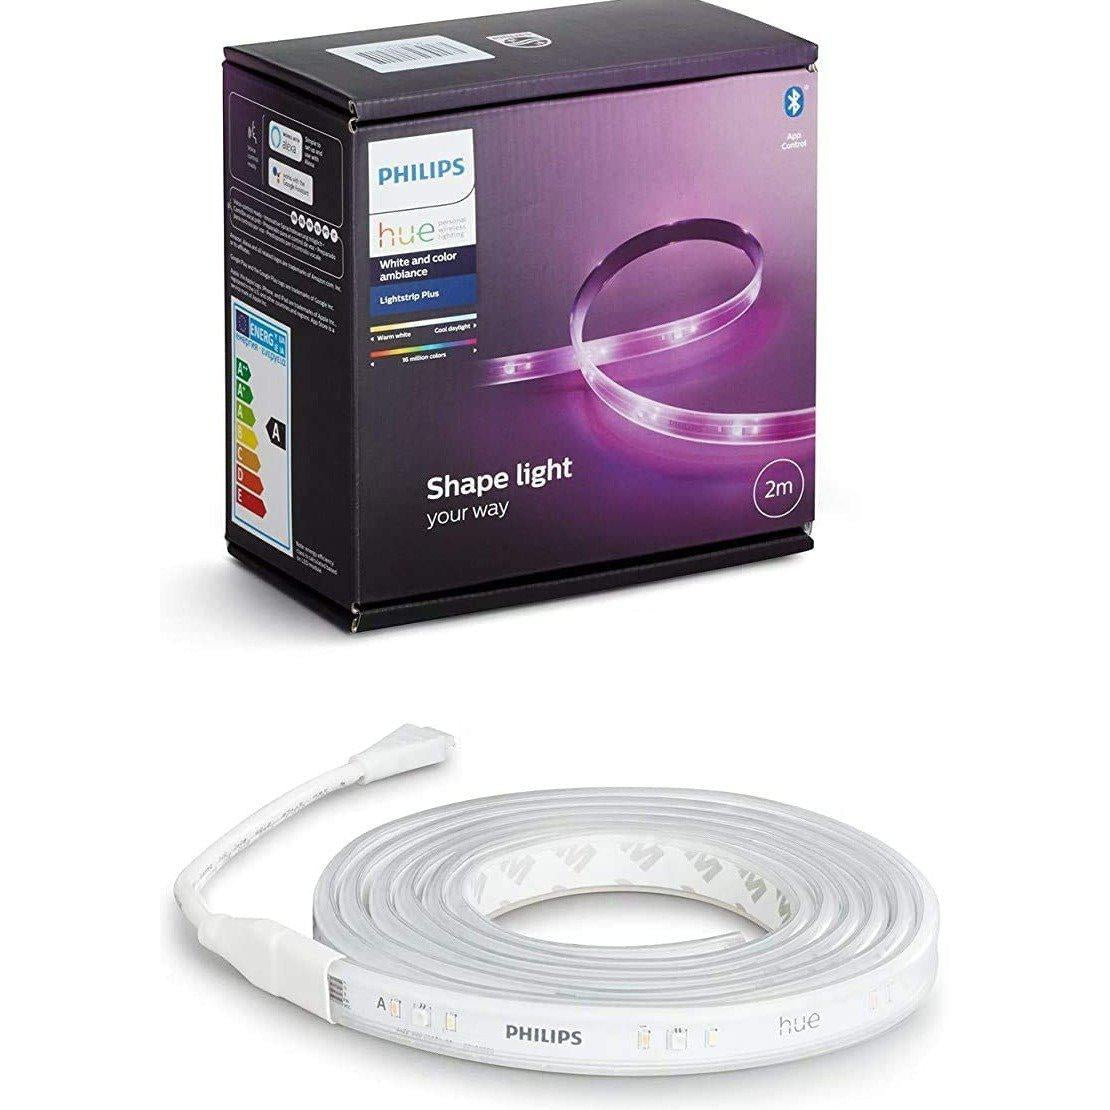 Philips Hue Lightstrip Plus White & Colour Ambiance Smart LED Kit with Bluetooth